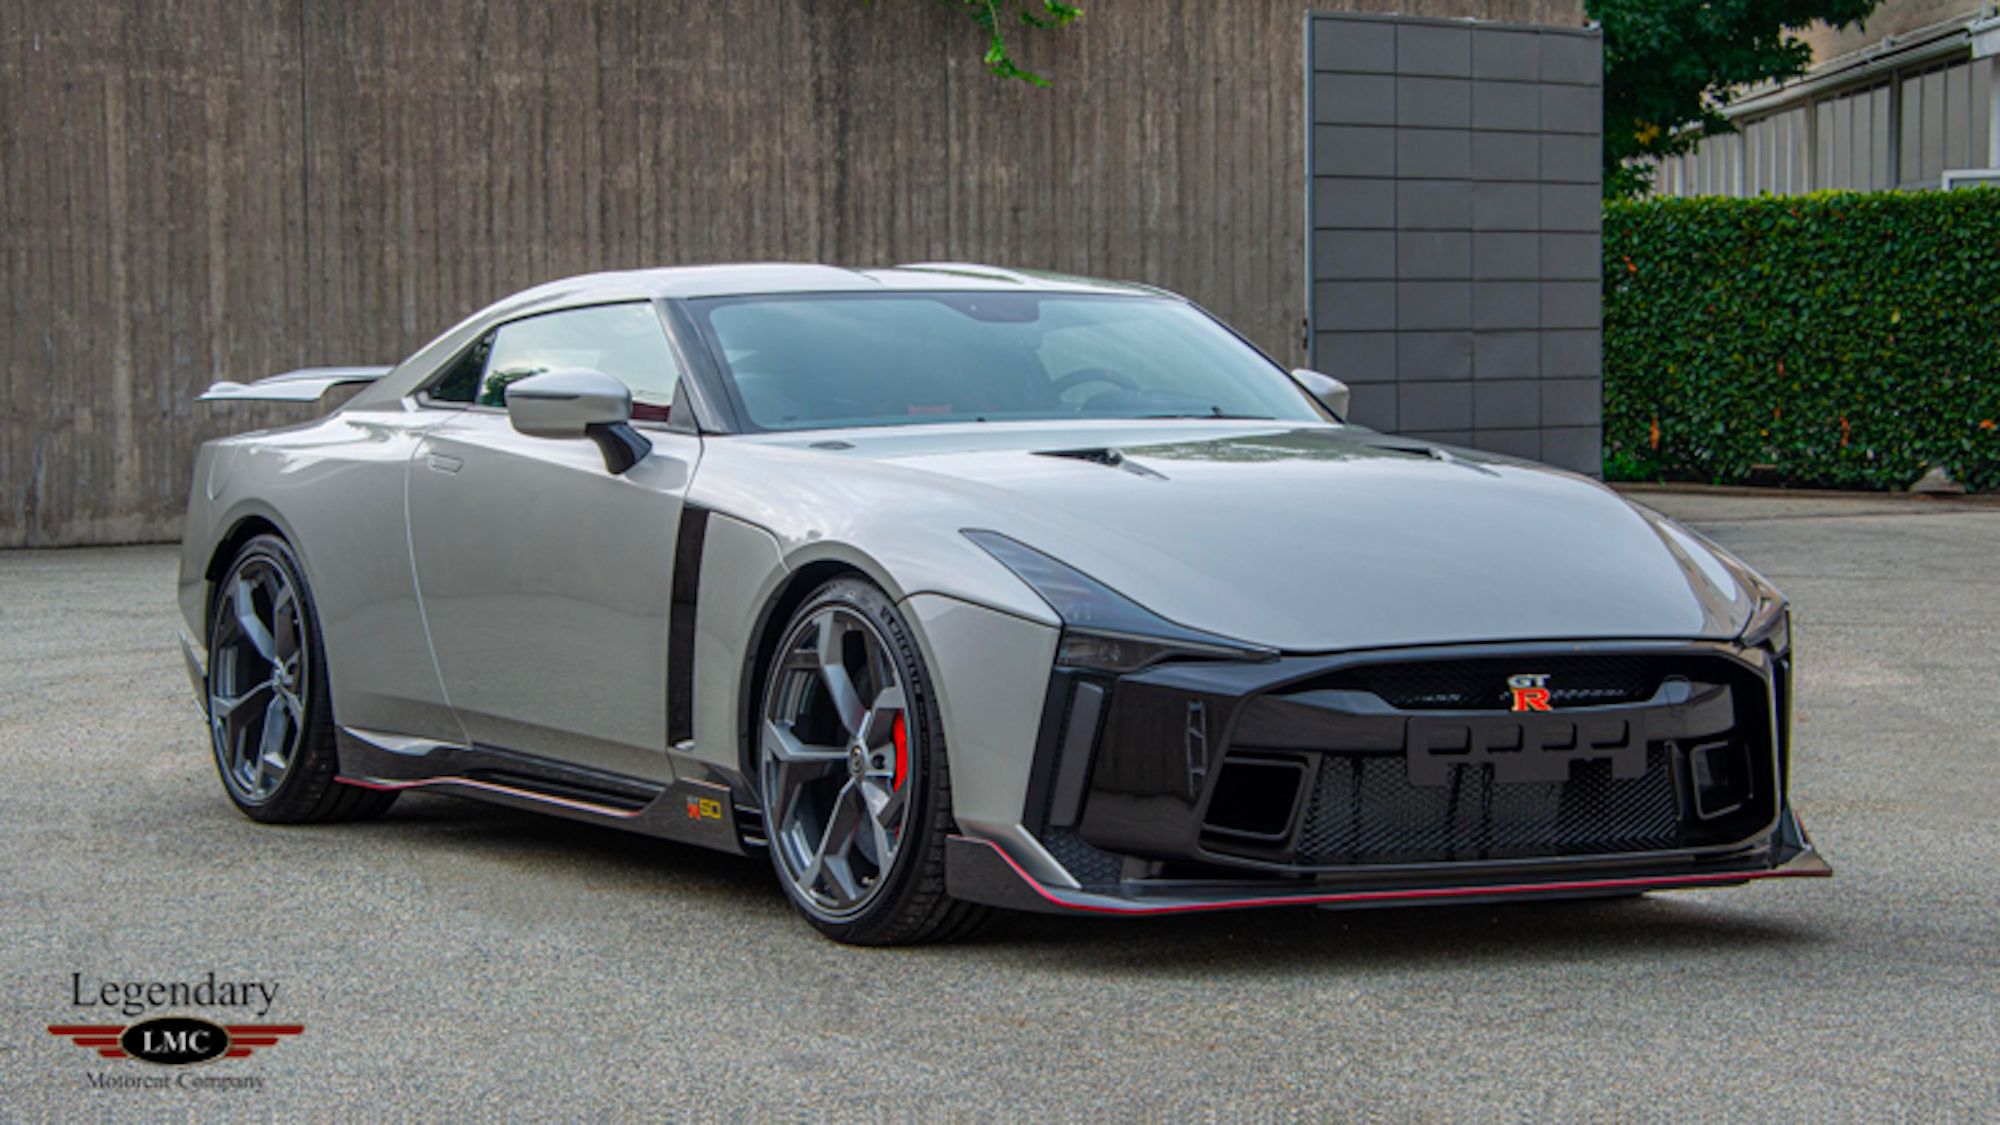 Nissan GT-R at 50: what form will the next GT-R take?